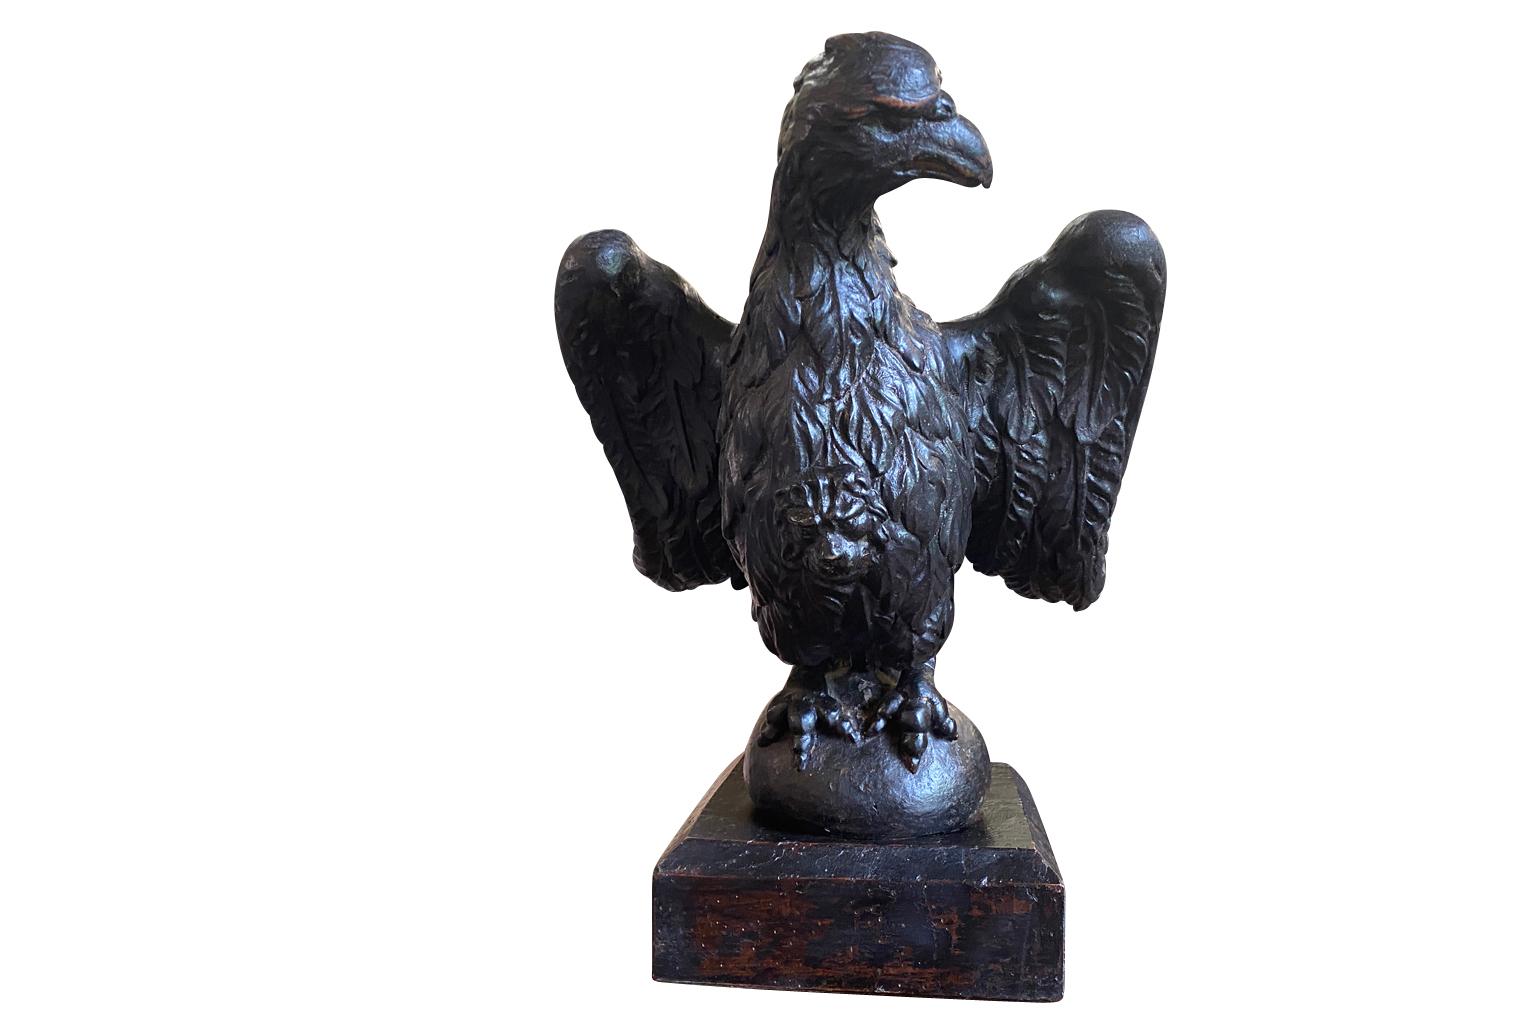 A very handsome 17th century Lutrin - Book Rest from the Veneto region of Italy.  An eagle form beautifully crafted in polychromed walnut - now resting on its stand.  A lion adorns the body of the eagle.  Terrific patina.  Perfect for any table top